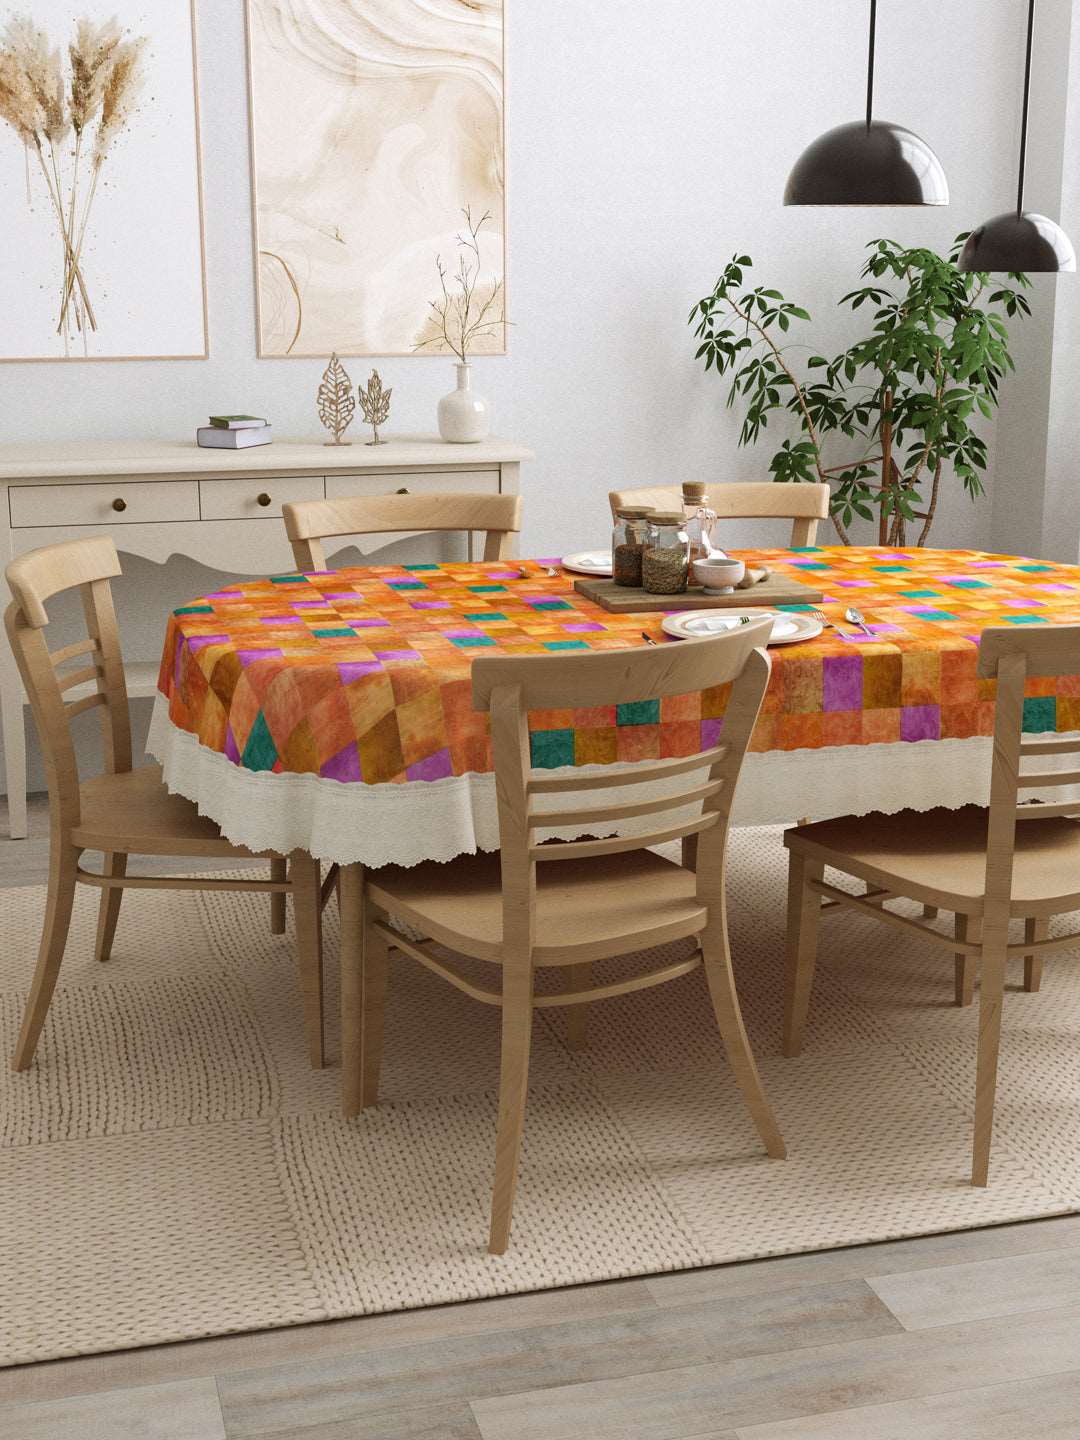 6 Seater Oval Dining Table Cover; 60x90 Inches; Material - PVC; Anti Slip; Checks On Orange